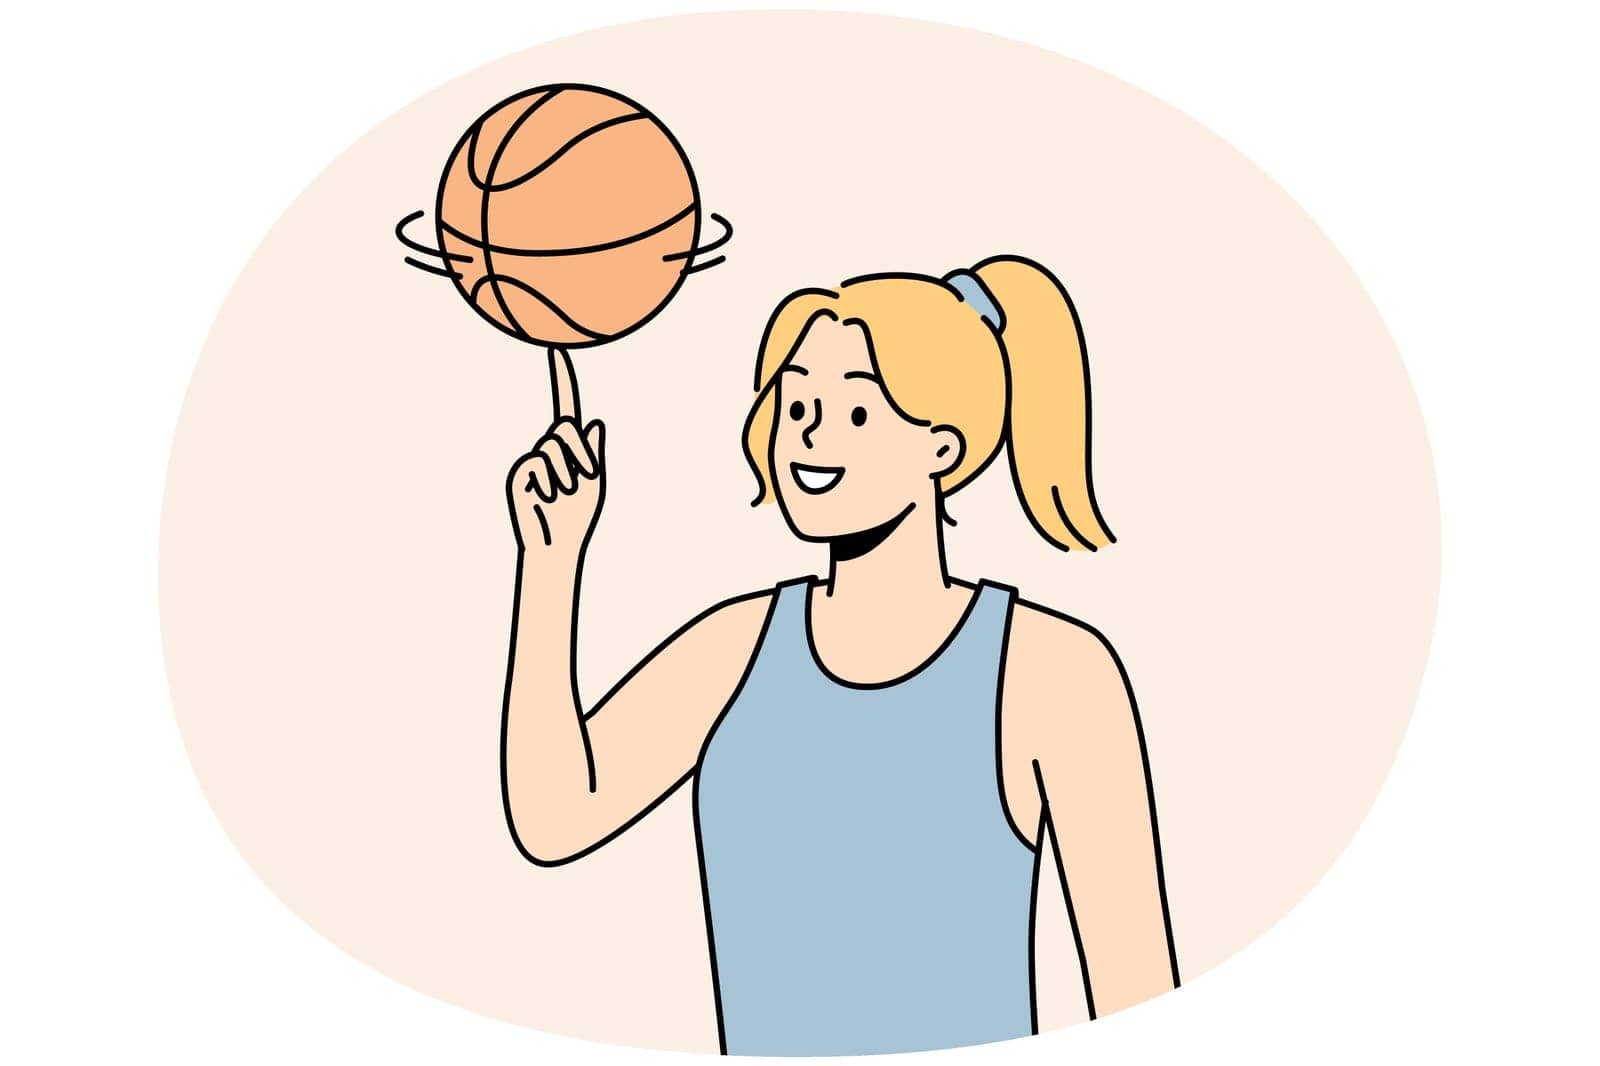 Smiling young woman athlete spin ball on finger. Happy girl basketball player play with ball. Sport and game activity. Vector illustration.